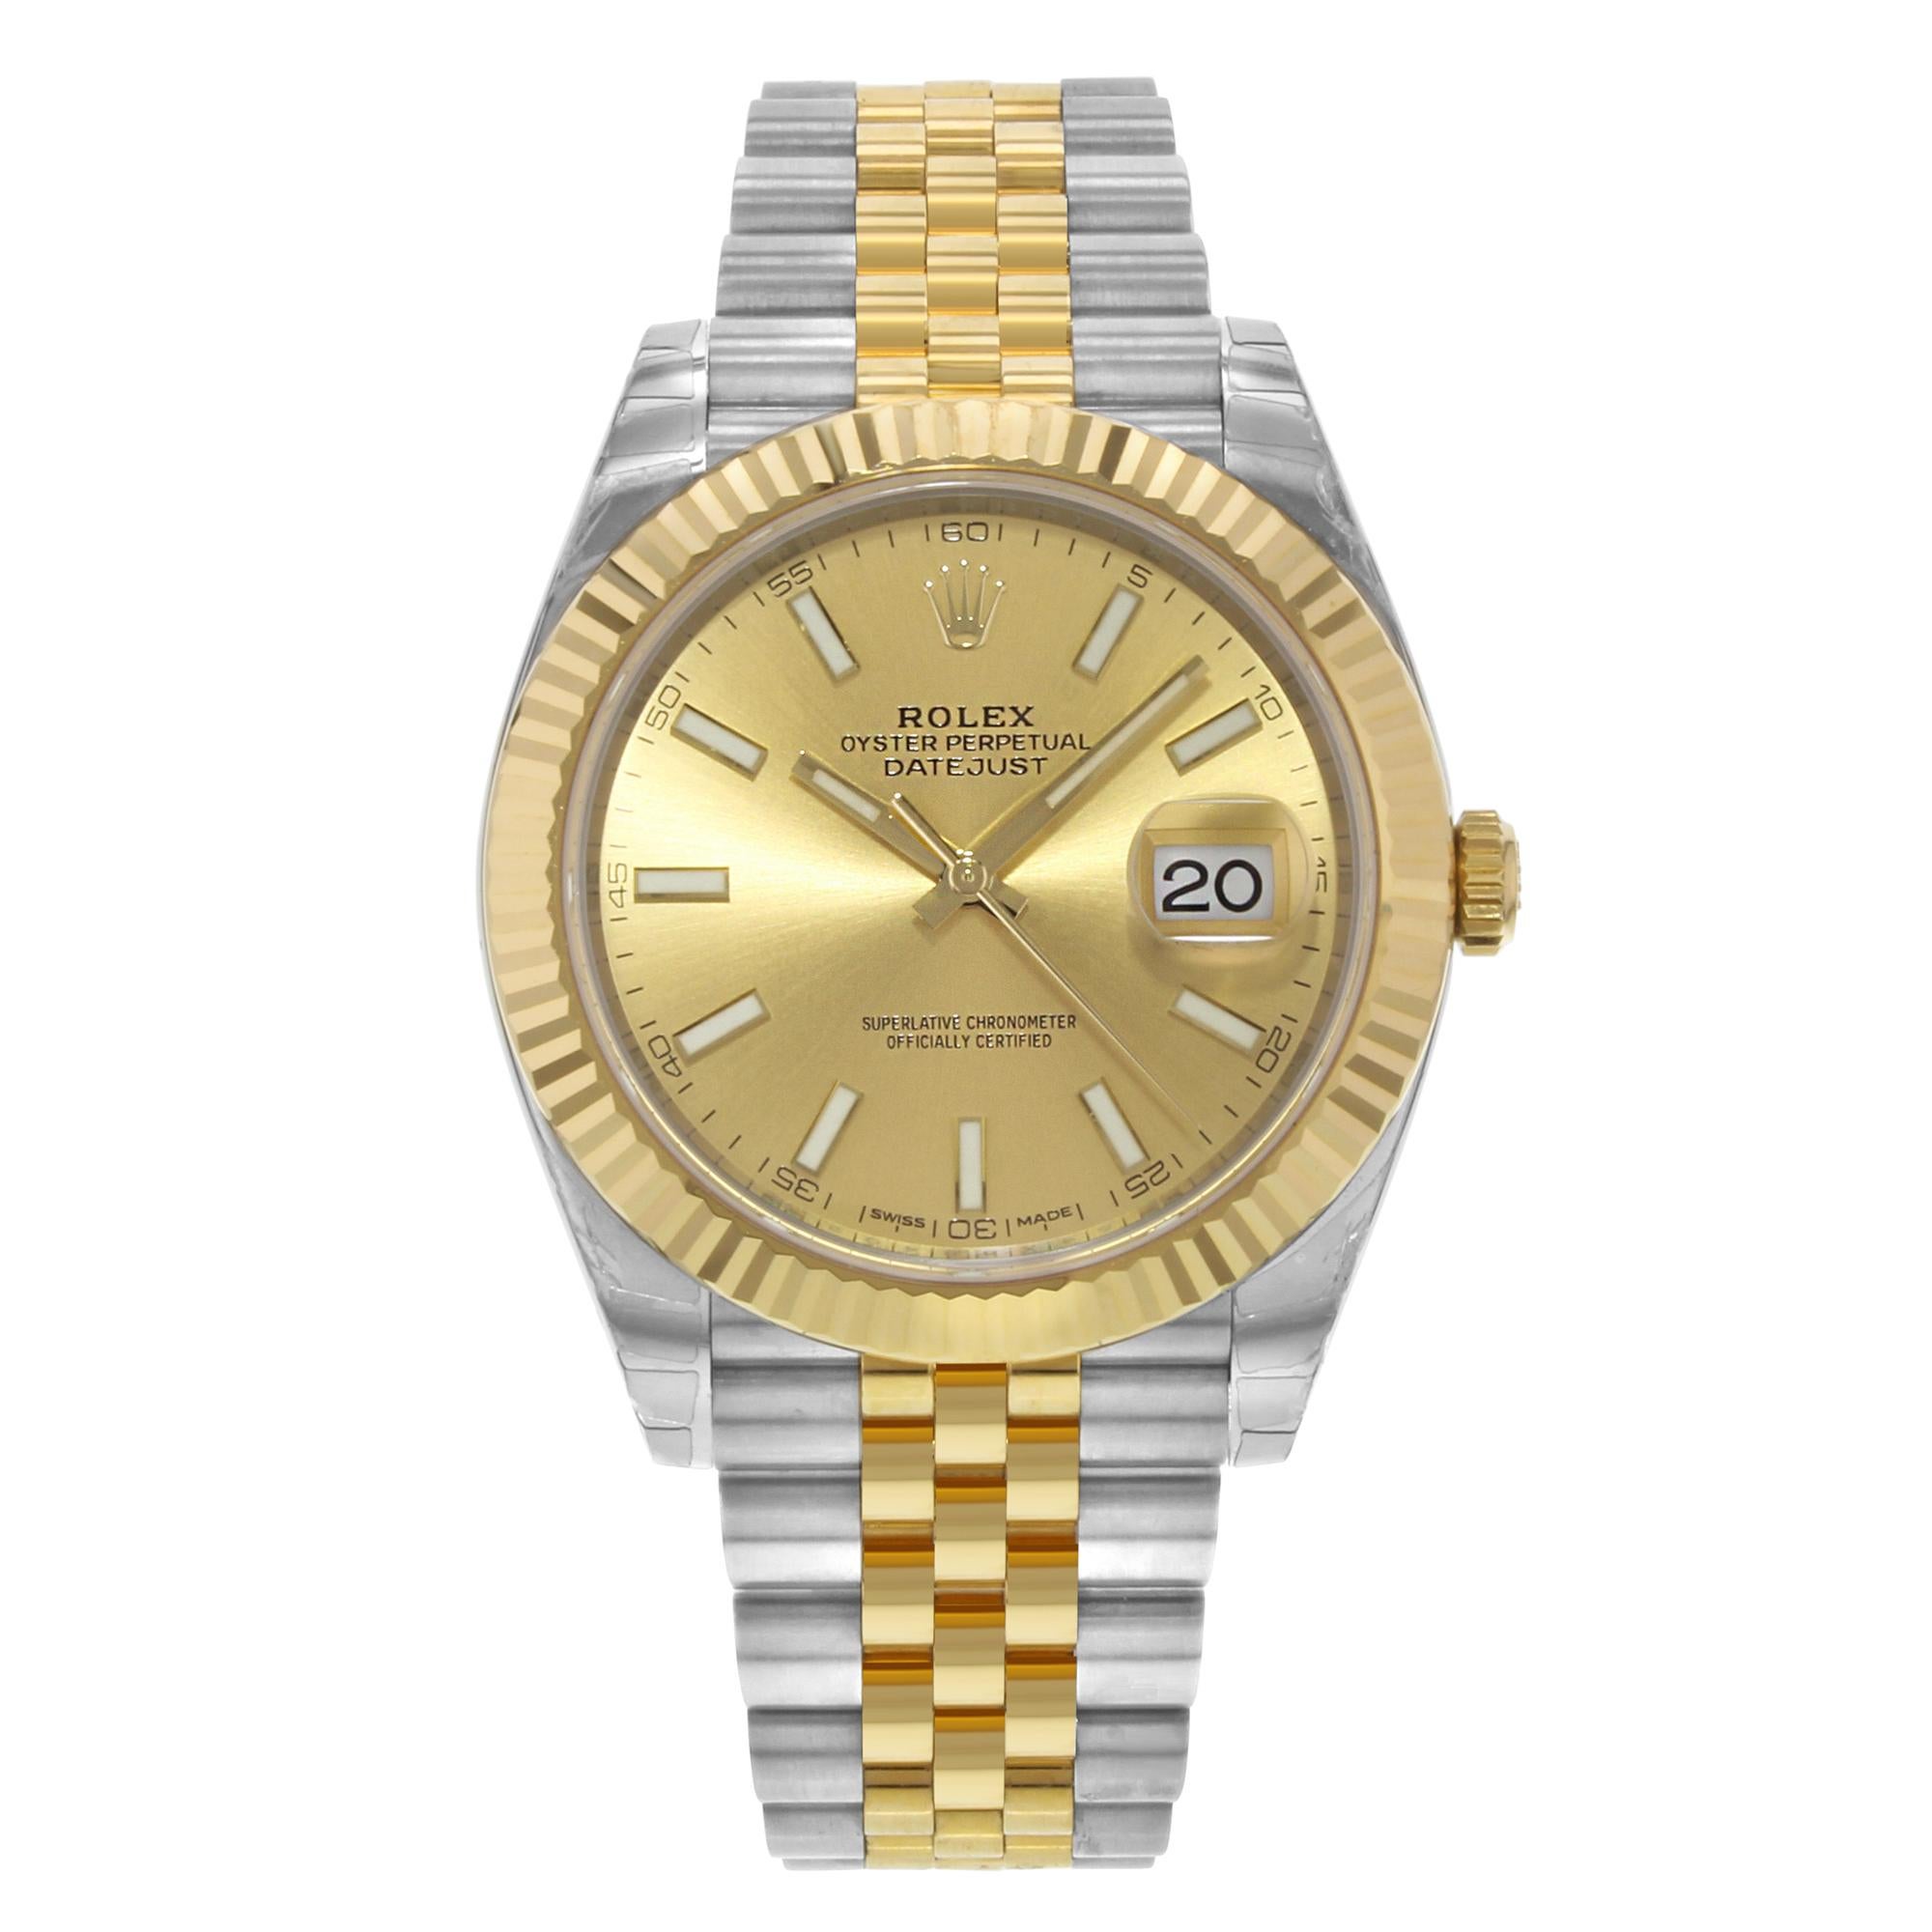 This brand new Rolex Datejust 41 126333 is a beautiful men's timepiece that is powered by mechanical (automatic) movement which is cased in a stainless steel case. It has a round shape face, date indicator dial and has hand sticks style markers. It